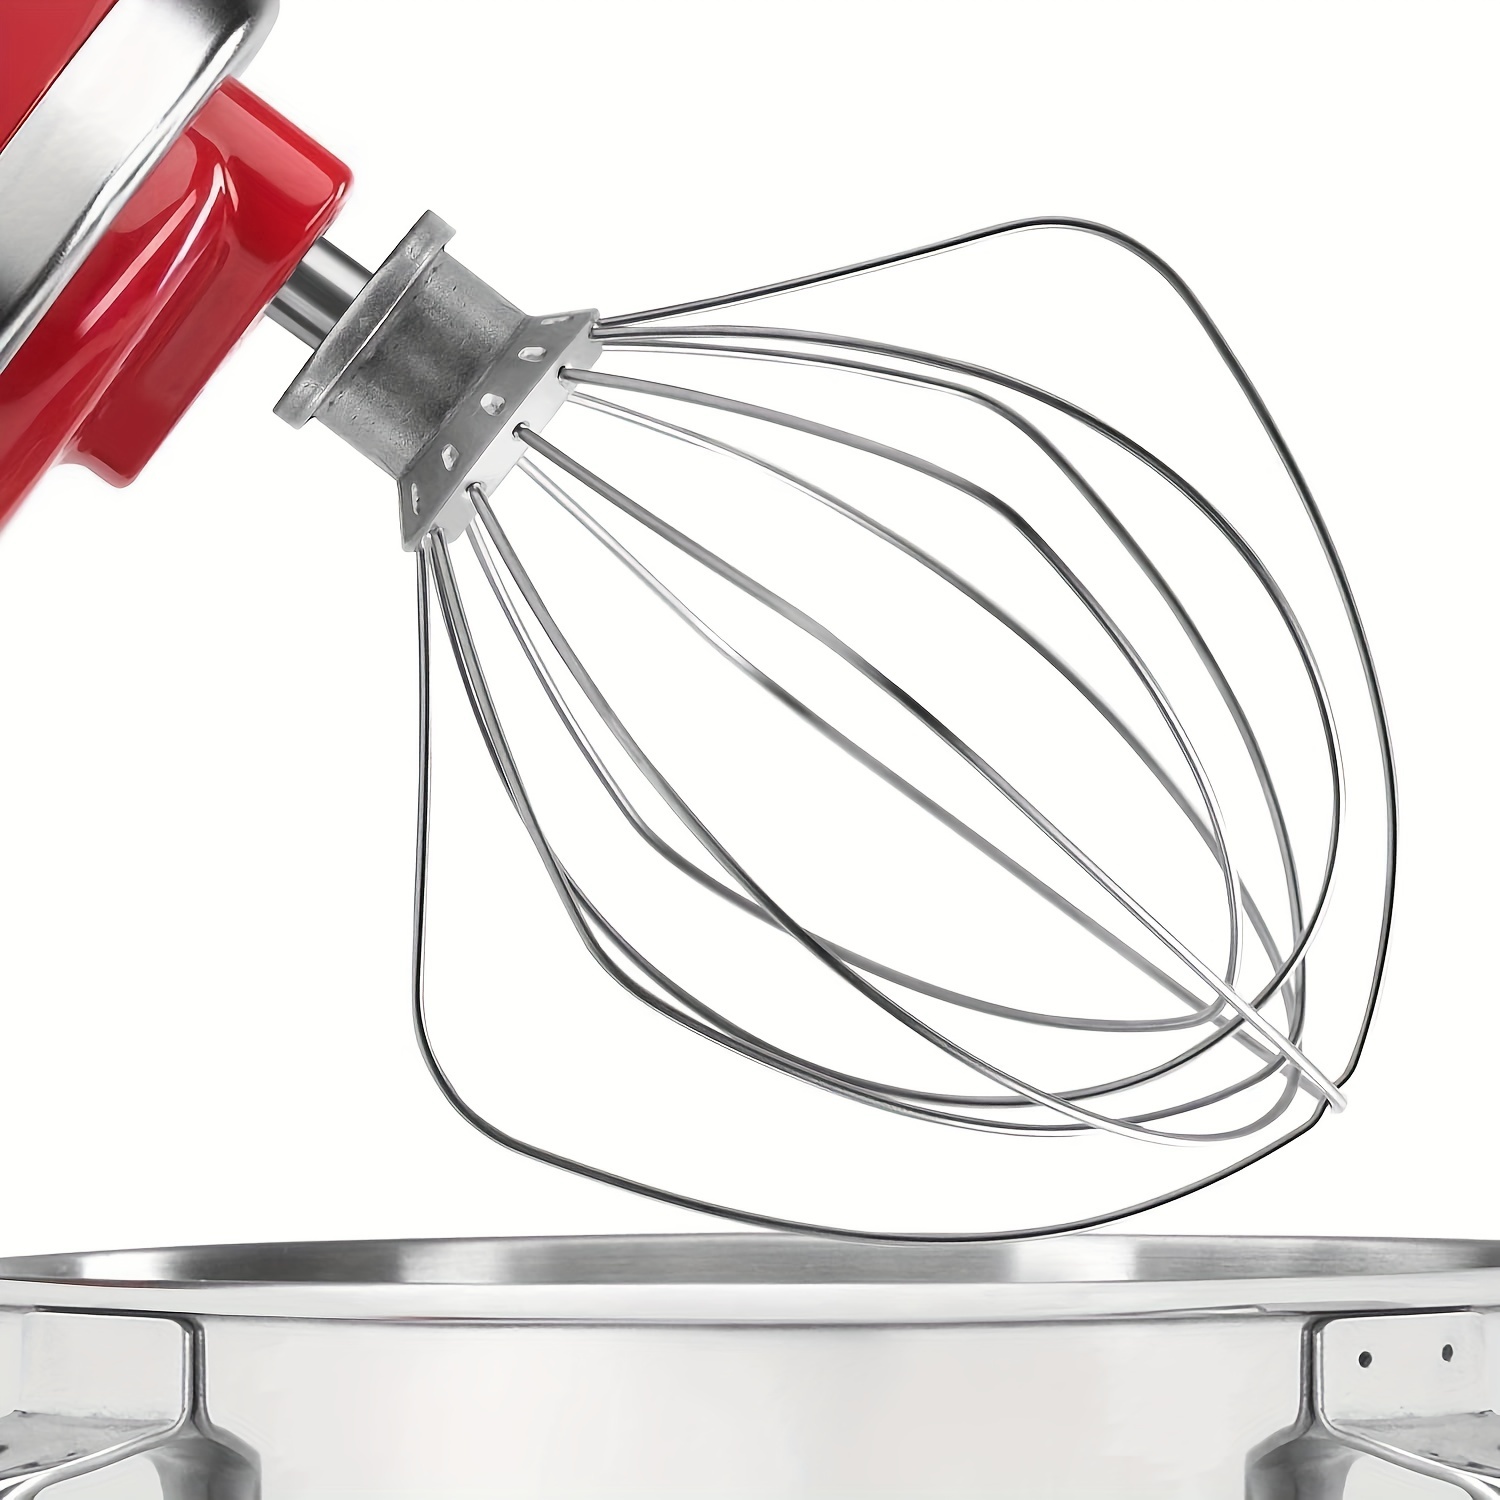 Wire Whip for Kitchenaid Stand Mixer 5QT Lift and 6QT, Whisk